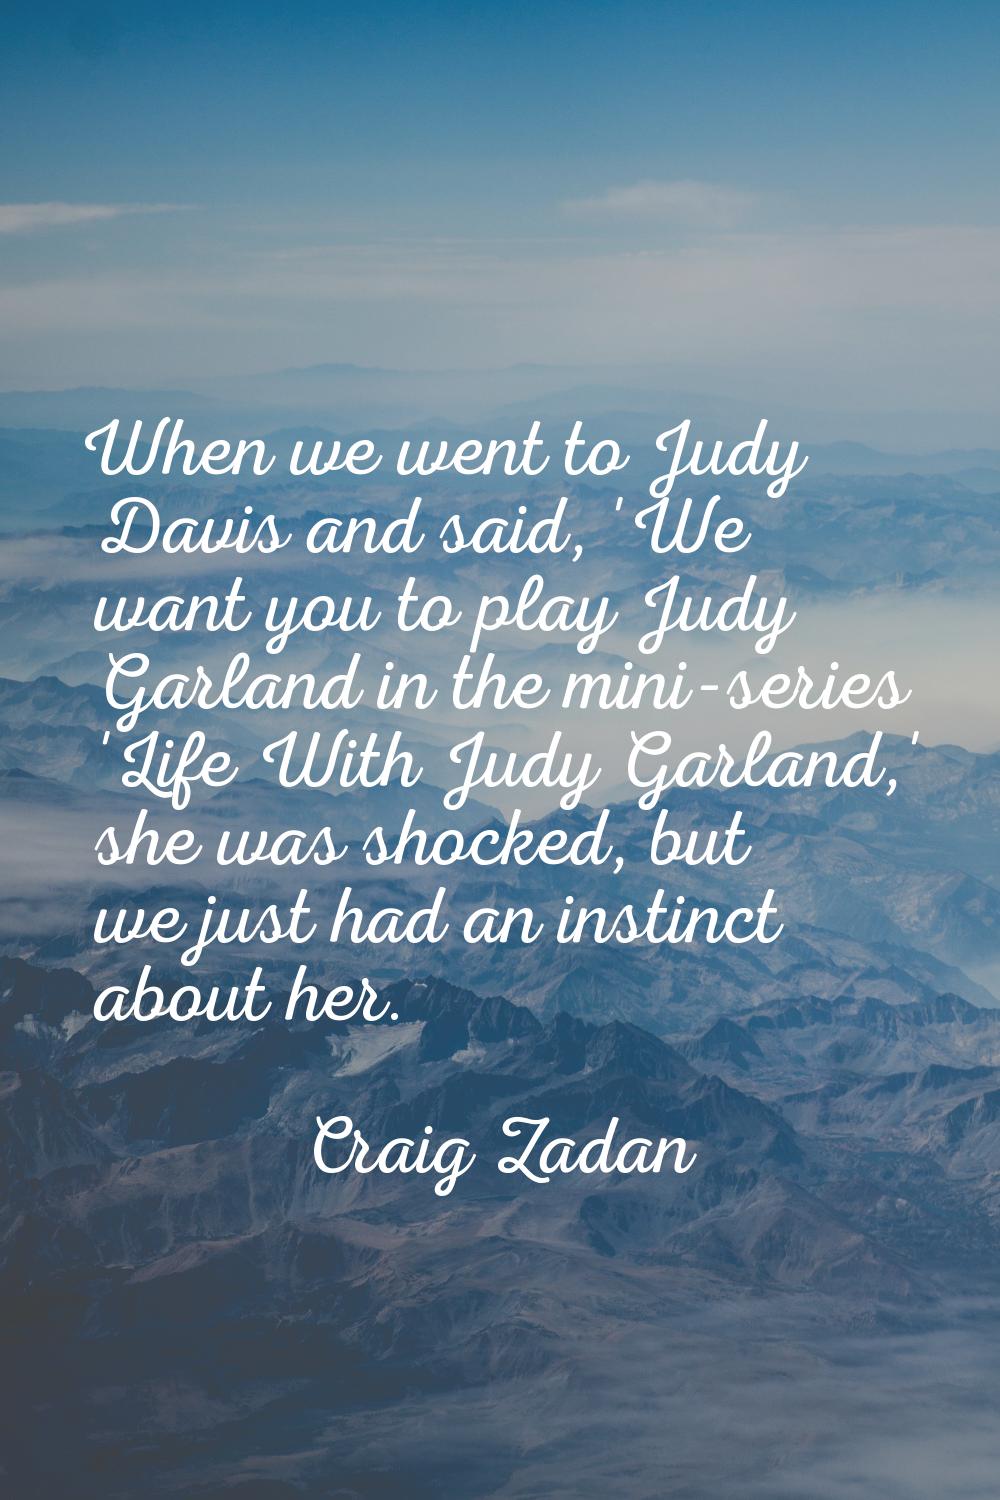 When we went to Judy Davis and said, 'We want you to play Judy Garland in the mini-series 'Life Wit